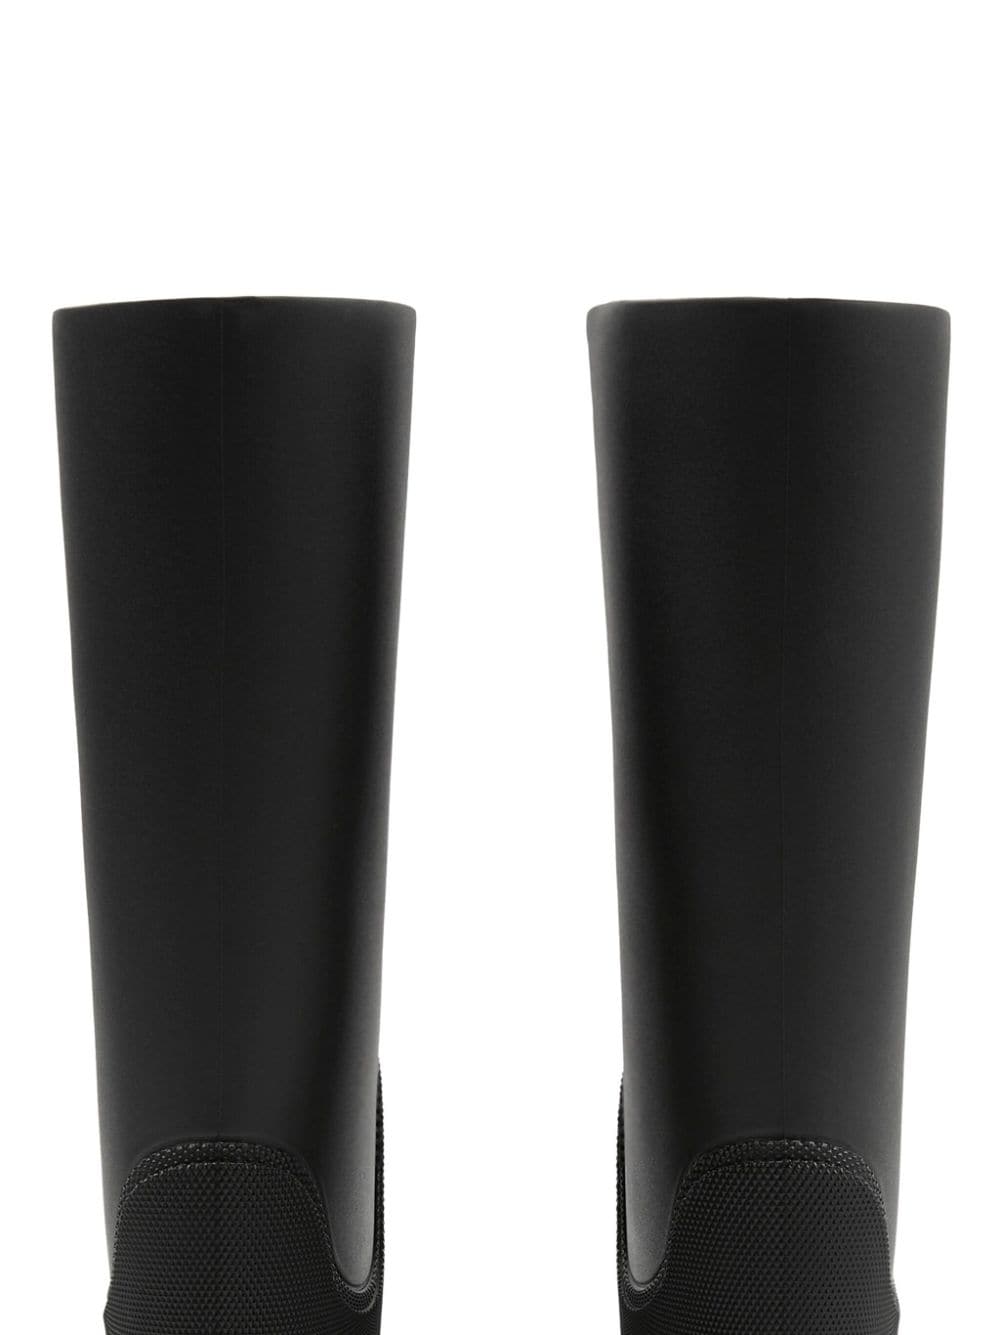 BURBERRY LONDON ENGLAND RUBBER BOOT